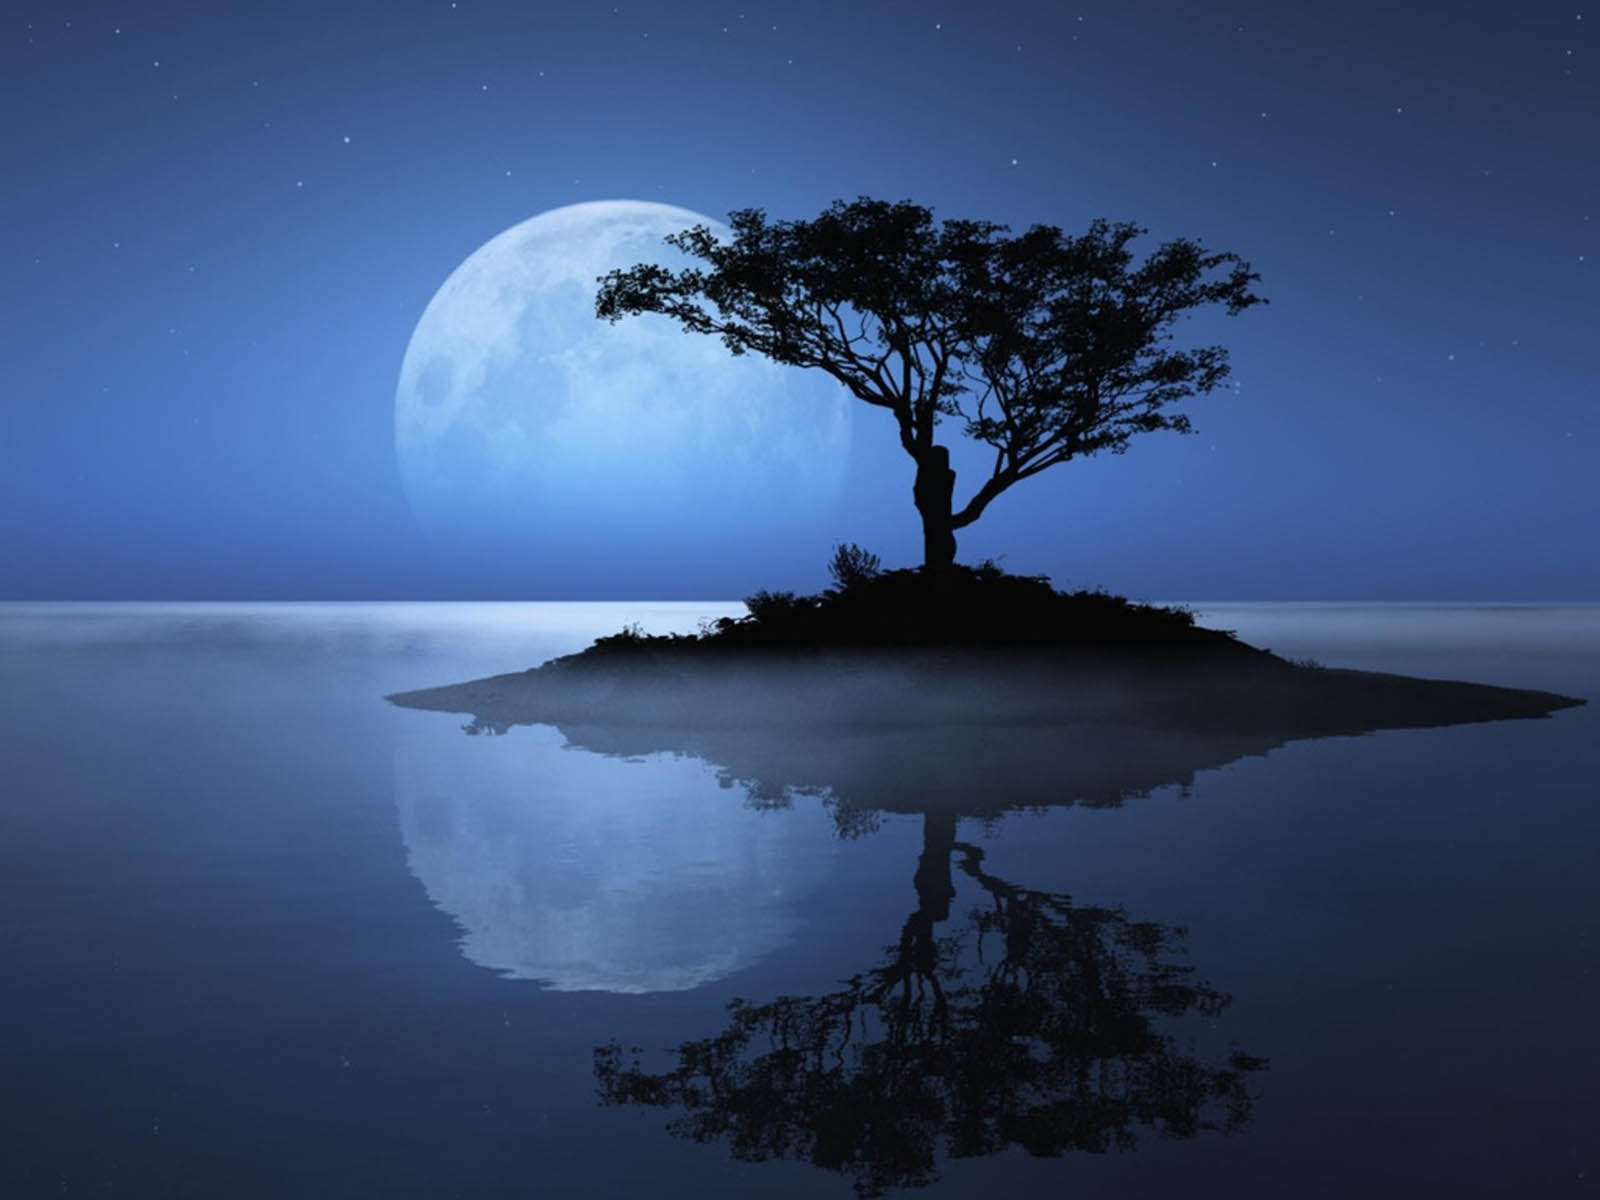 Tag Moon Fantasy Wallpaper Background Photos Image And Pictures For